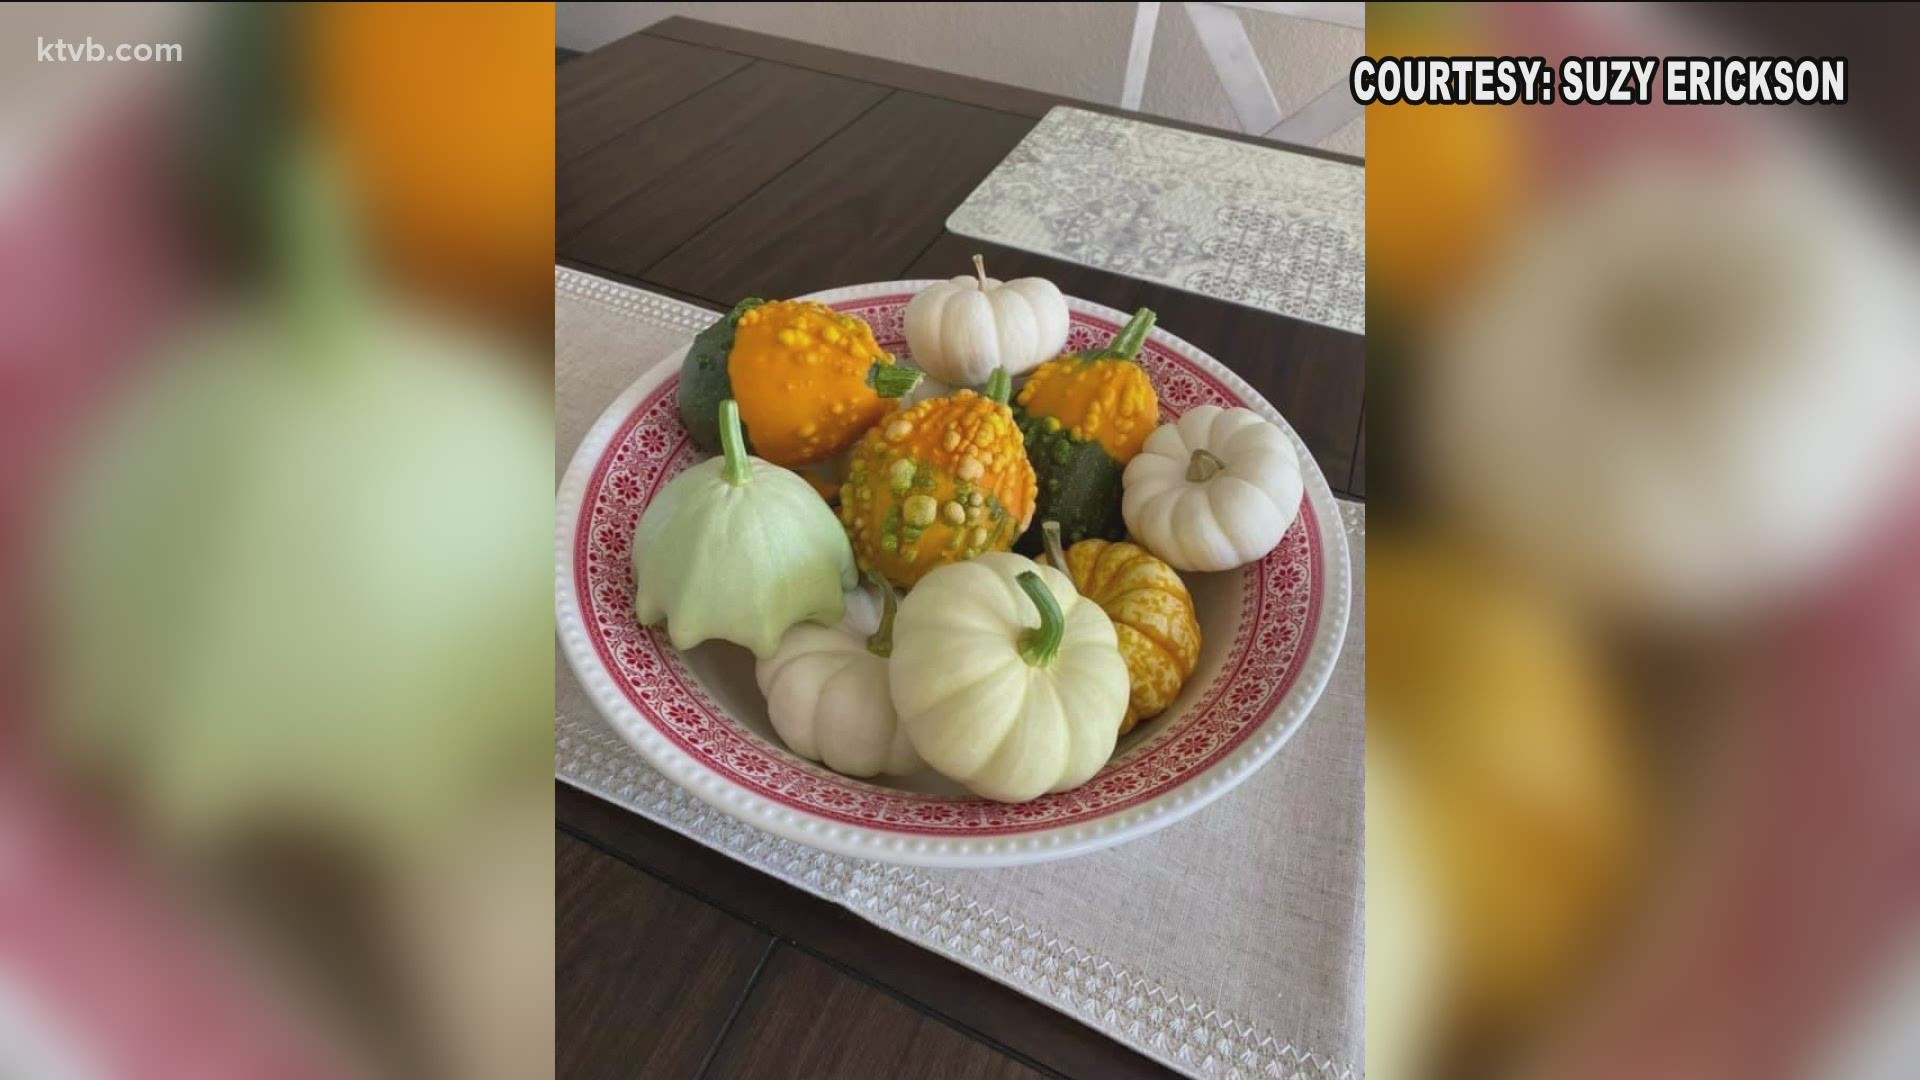 Jim Duthie shows some of the bountiful harvest that local gardeners have been enjoying this year.